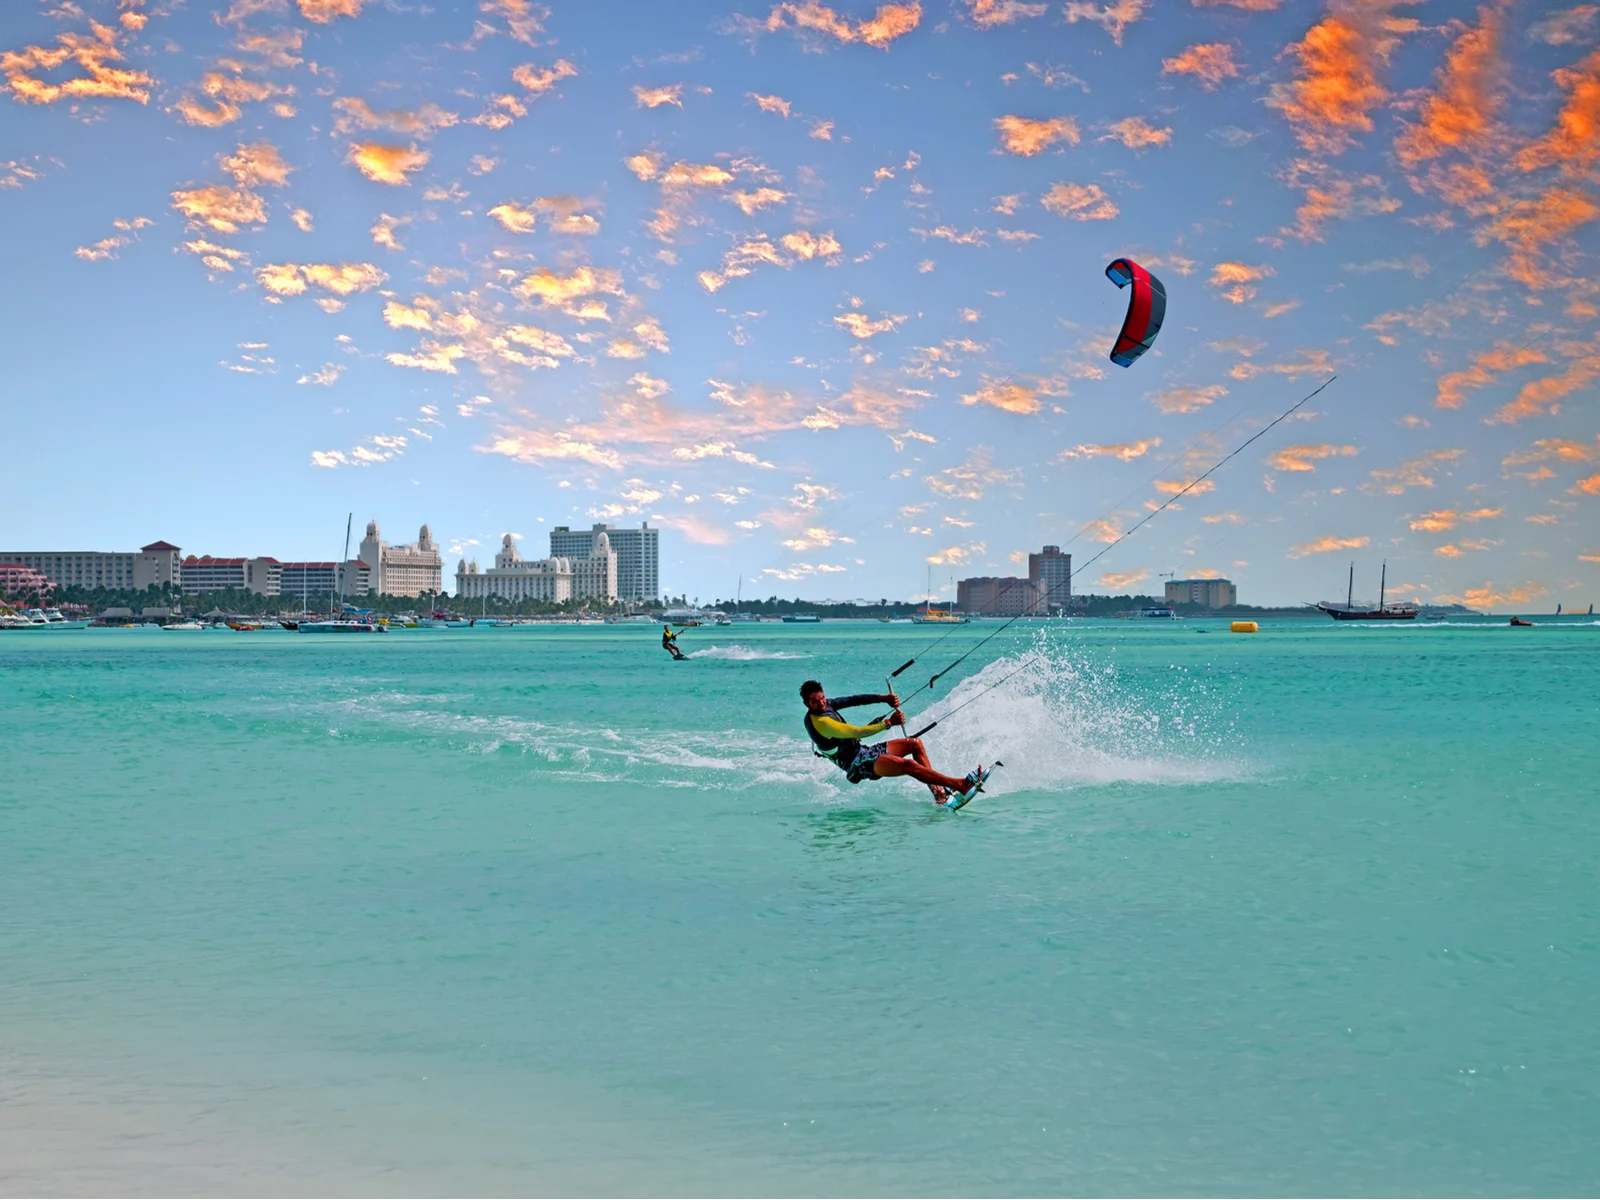 Guy kiteboarding on a beach, one of our favorite things to do in Aruba